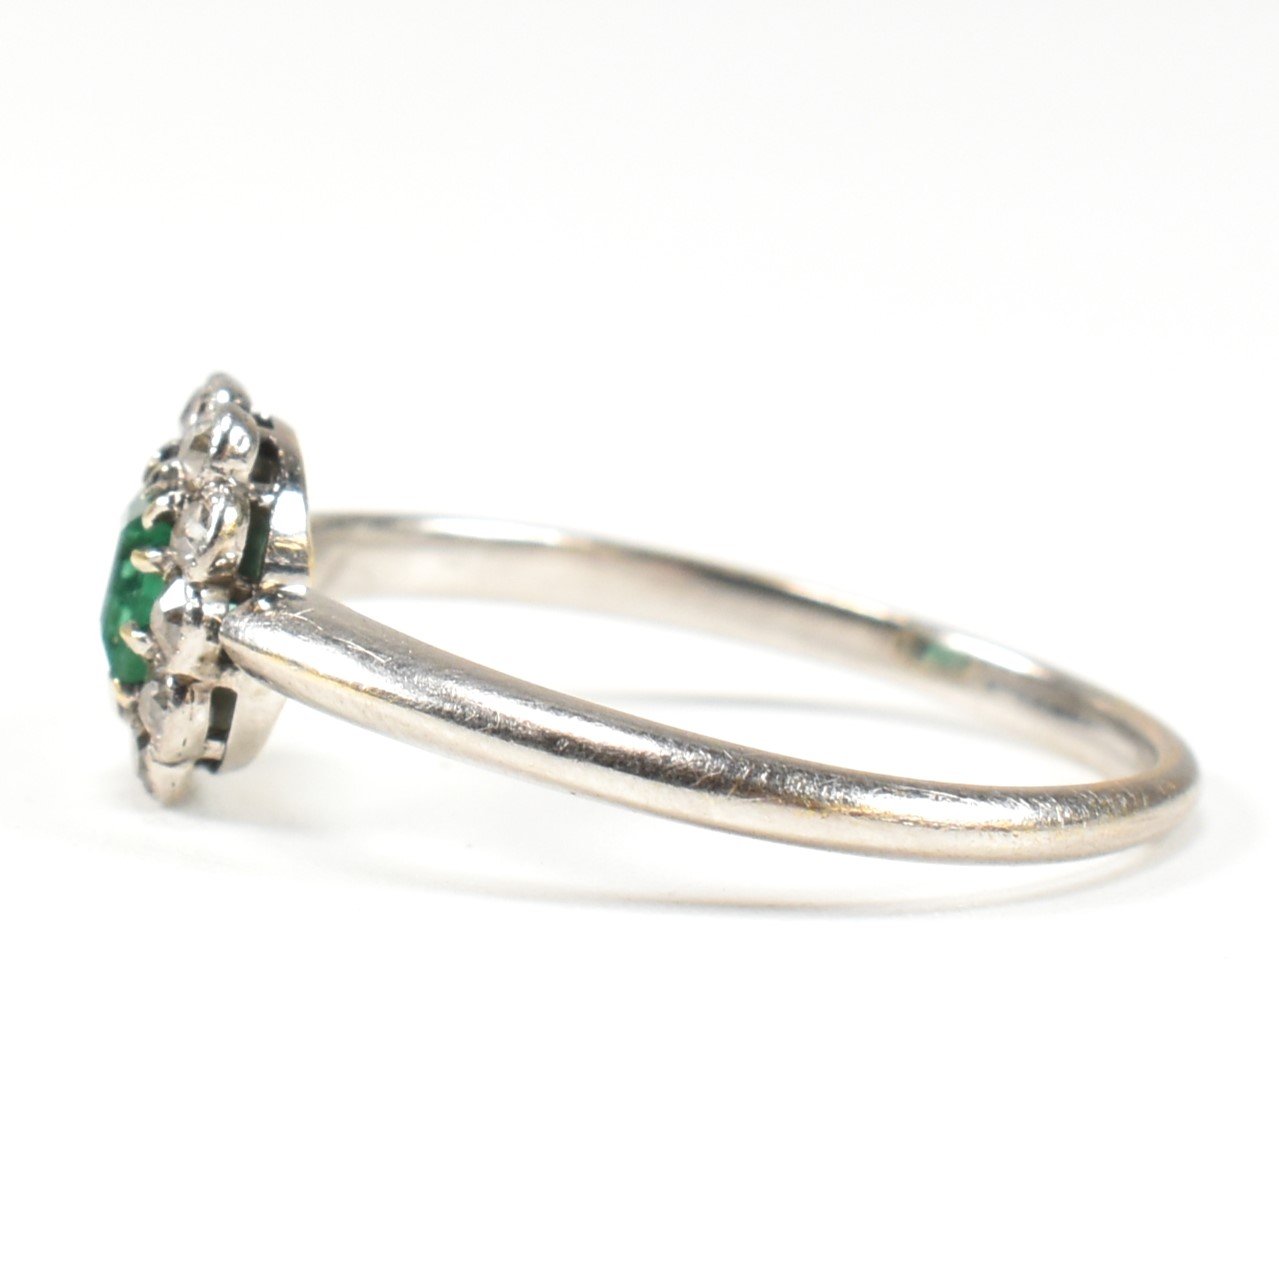 1920S 18CT WHITE GOLD EMERALD & DIAMOND CLUSTER RING - Image 7 of 9